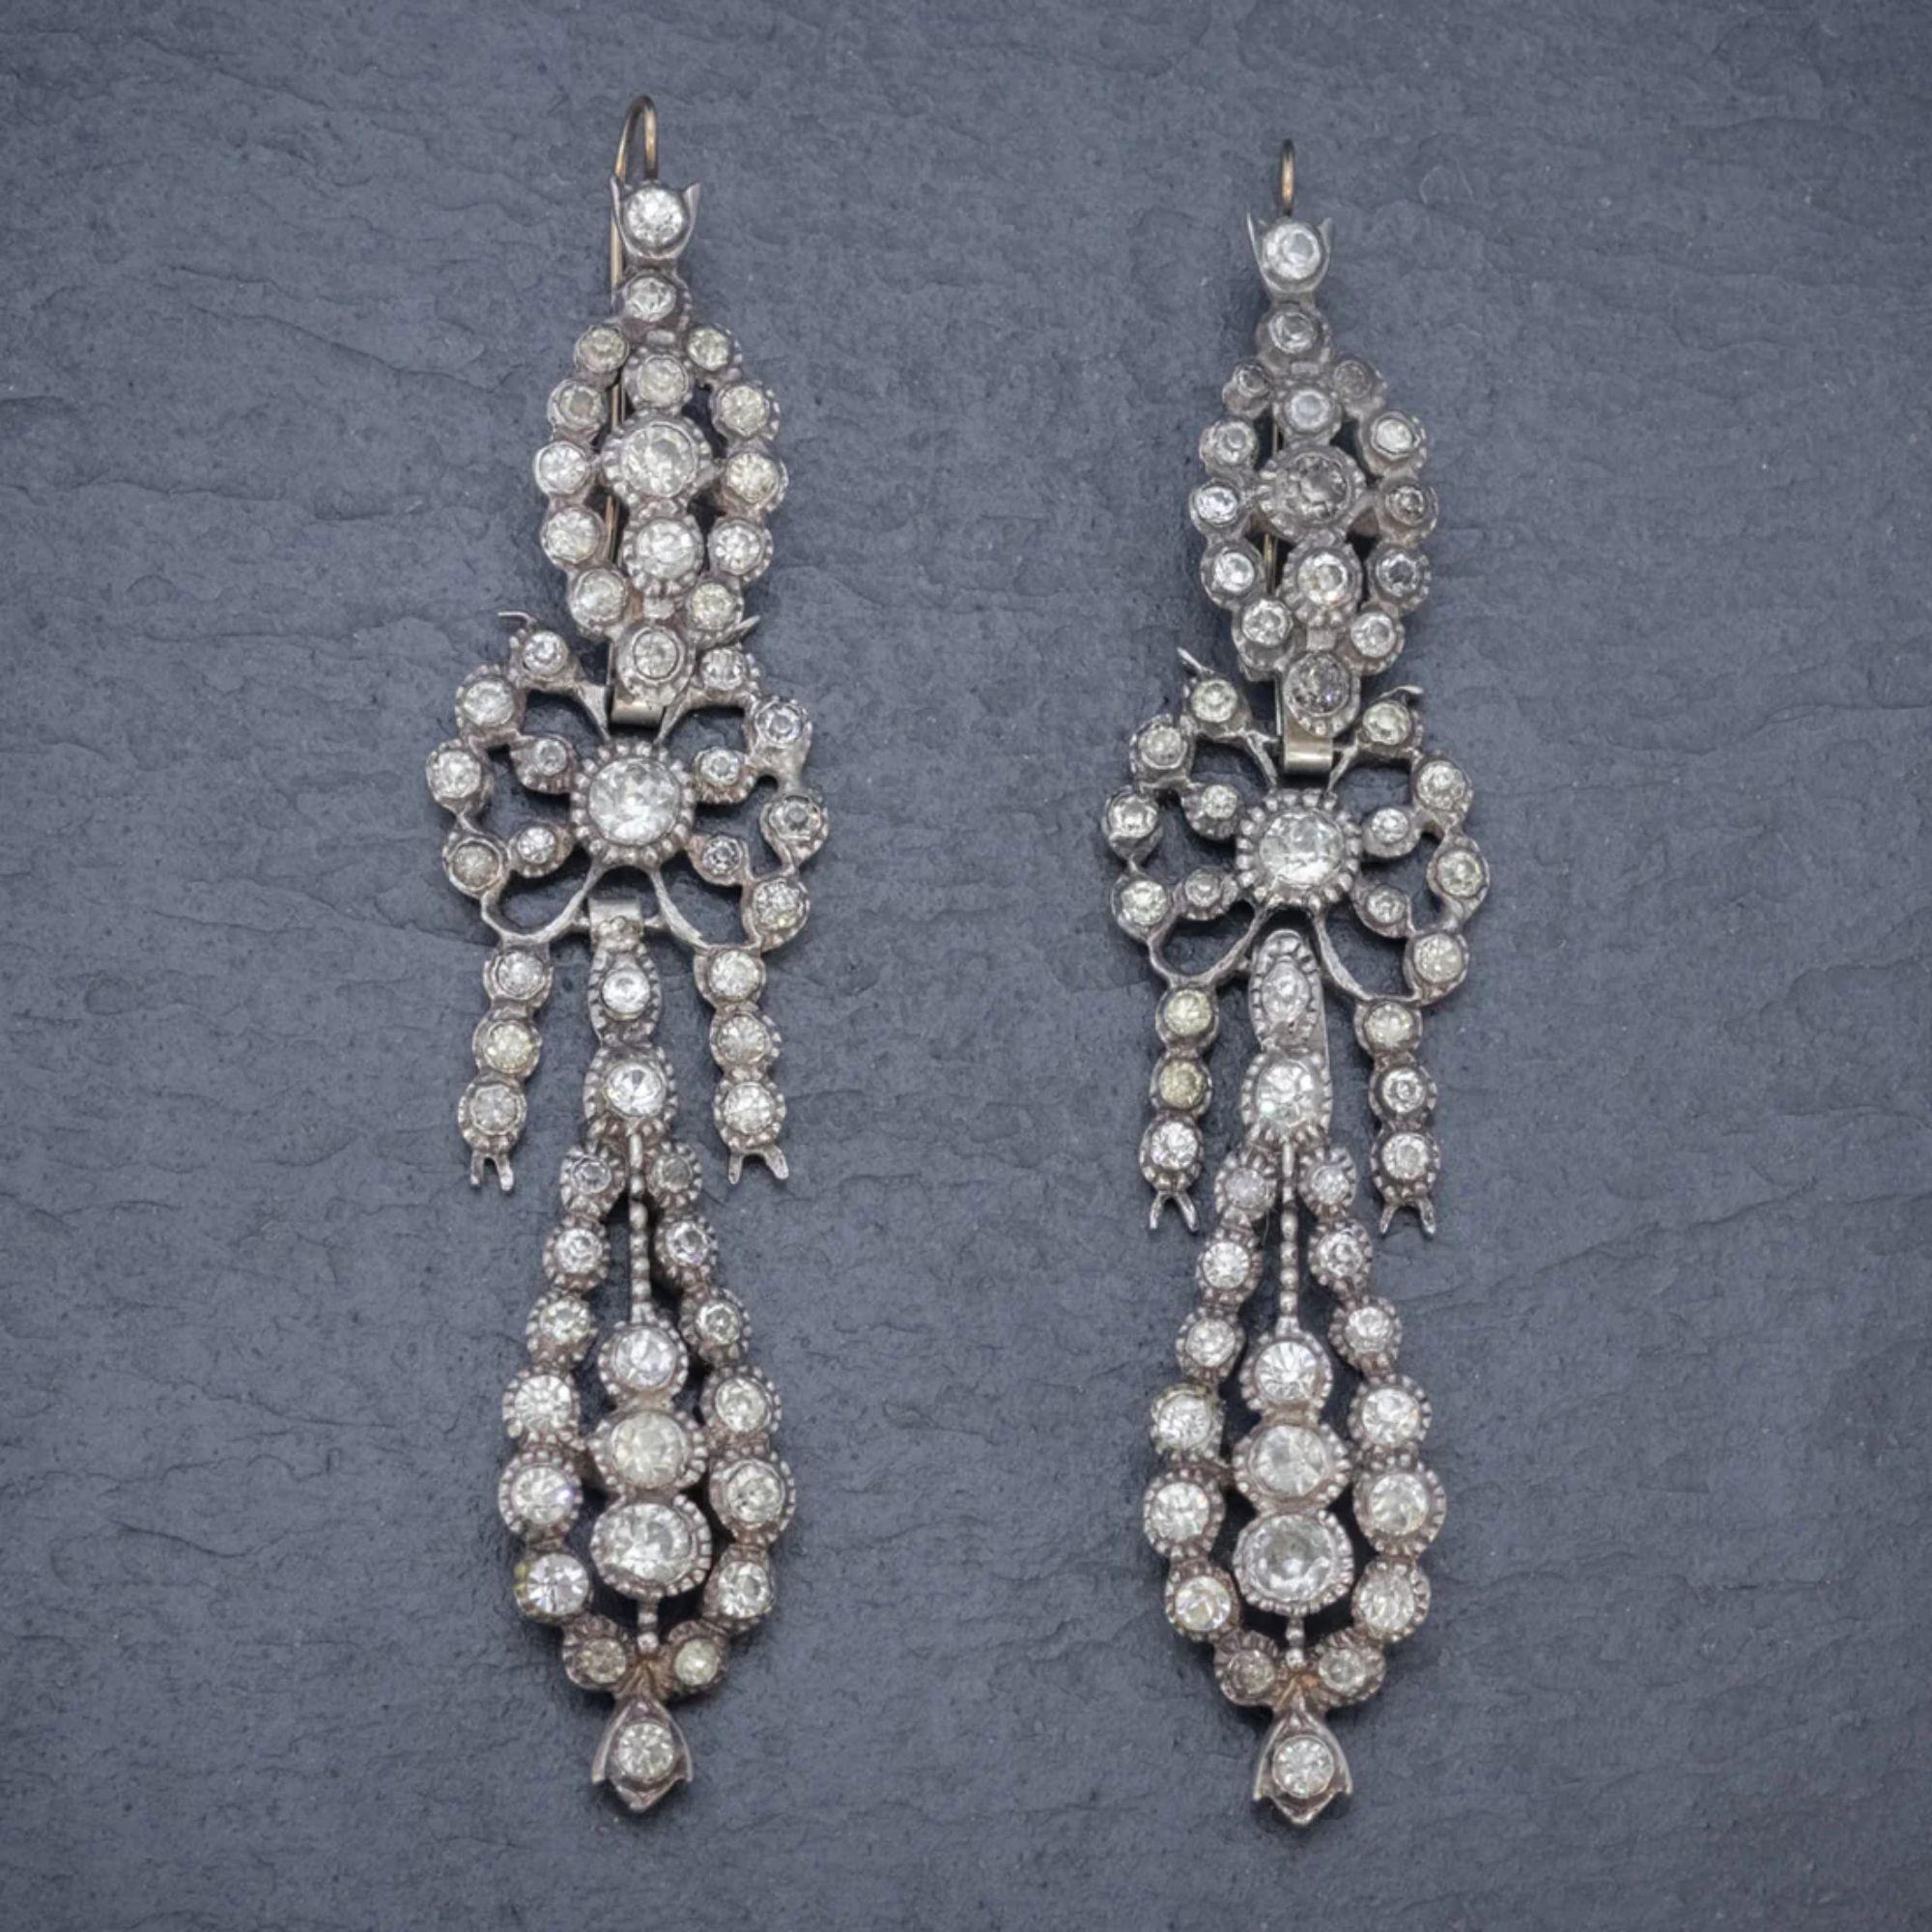 A spectacular pair of antique drop earrings made in France in the late 19th Century. Each earring is made up of three ornate sections decorated with an array of sparkling paste stones that simulate the beauty of diamonds.

Both are fashioned in